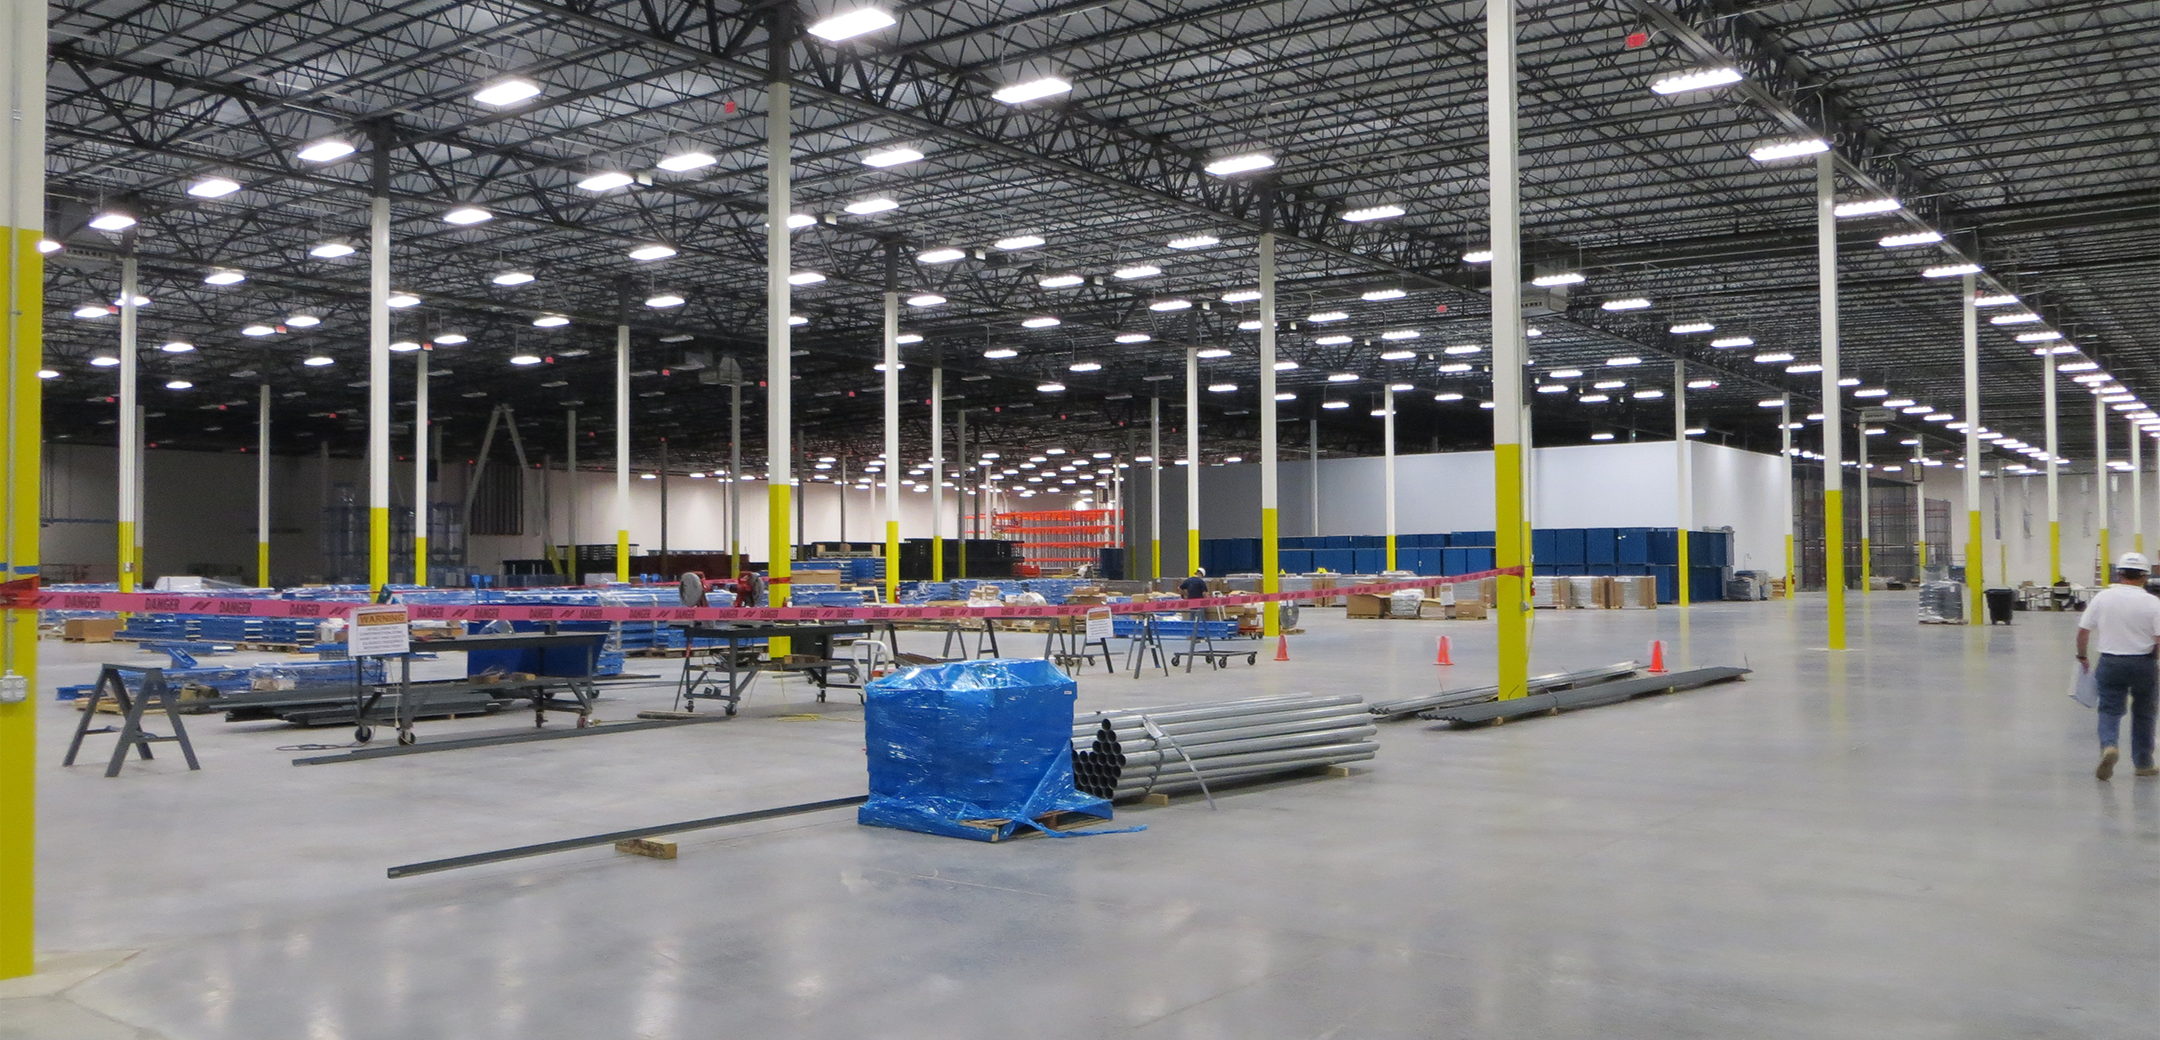 An interior view of the Project Liberty Distribution warehouse showcasing the inner length, support pillars and smooth concrete flooring during the assembly process.